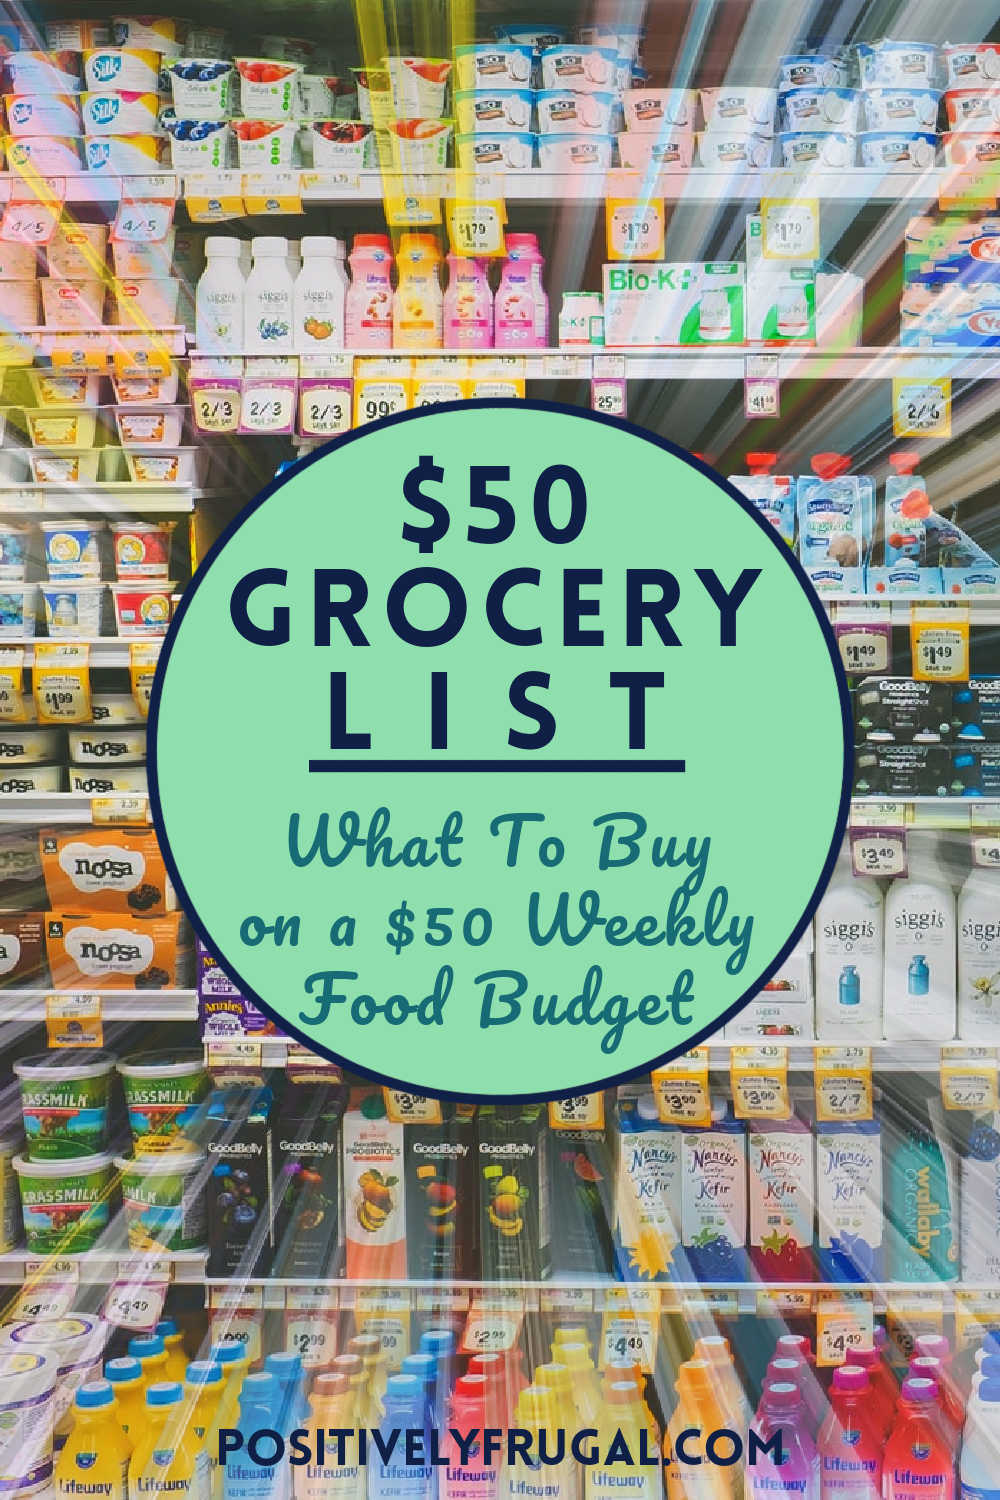 What To Buy on a $50 Weekly Food Budget by PositivelyFrugal.com